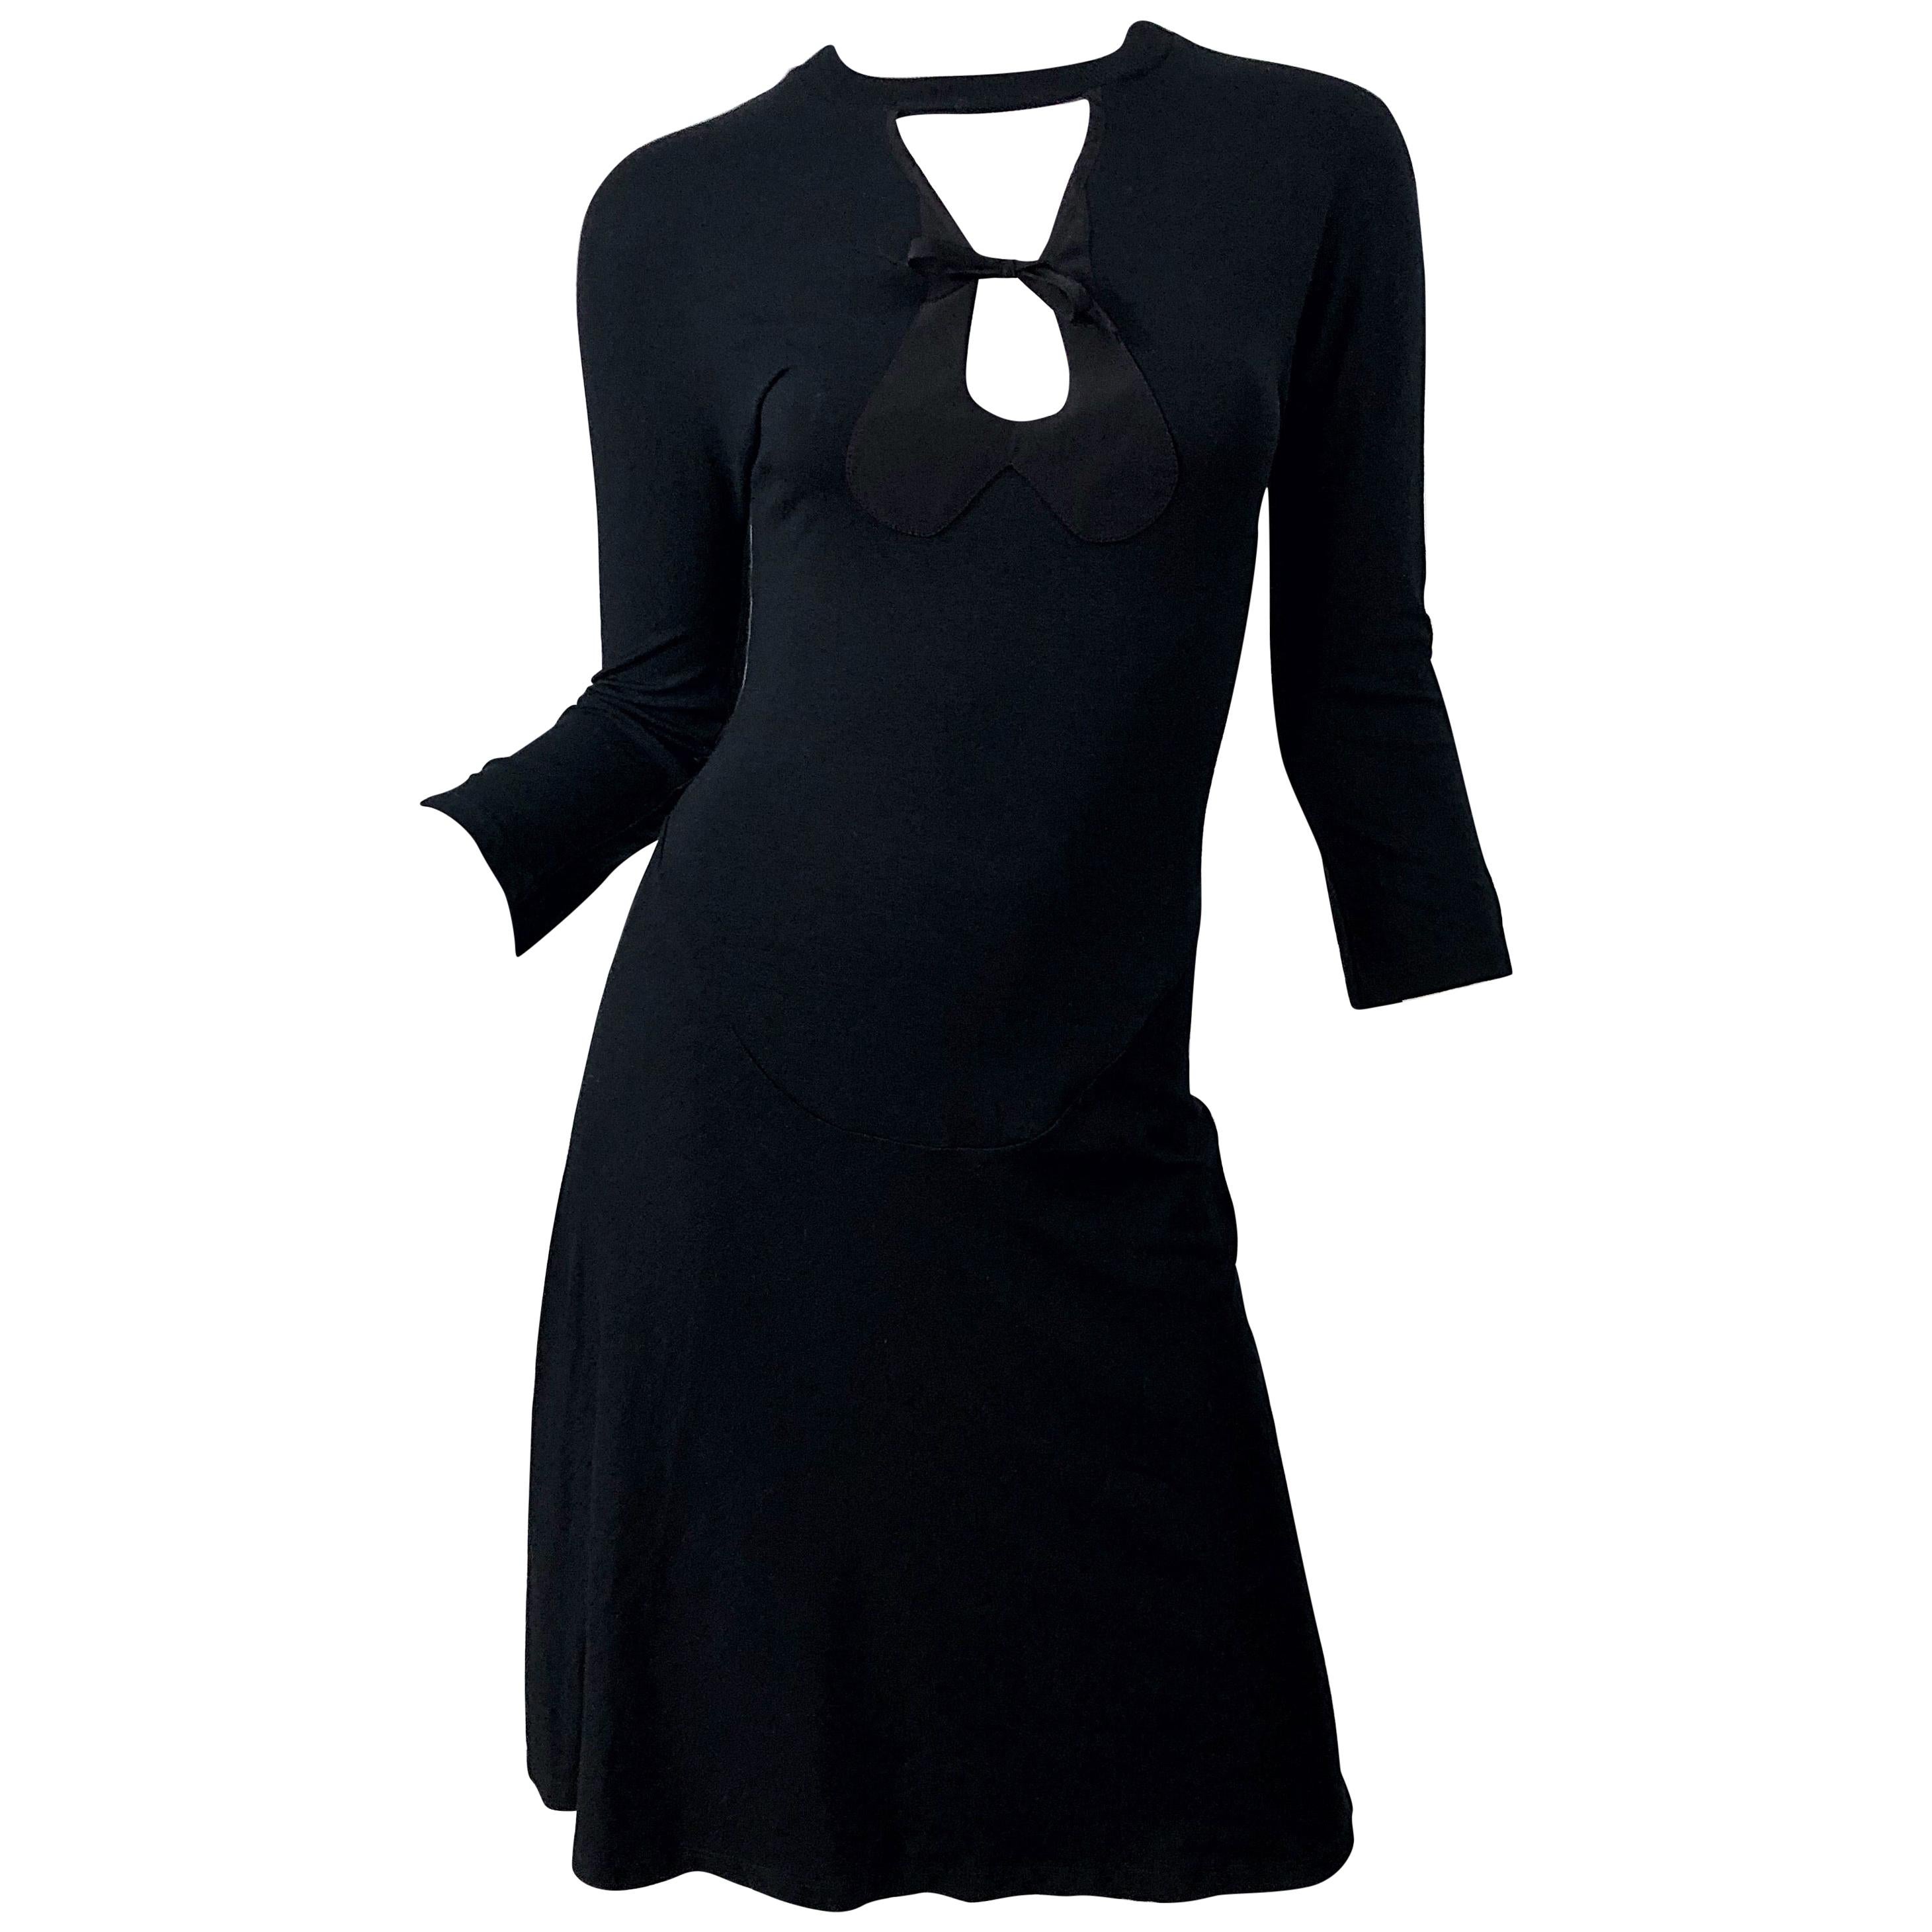 Gibo Early 2000s Italian Made Size 40 Black Cut - Out 3/4 Sleeves Dress 